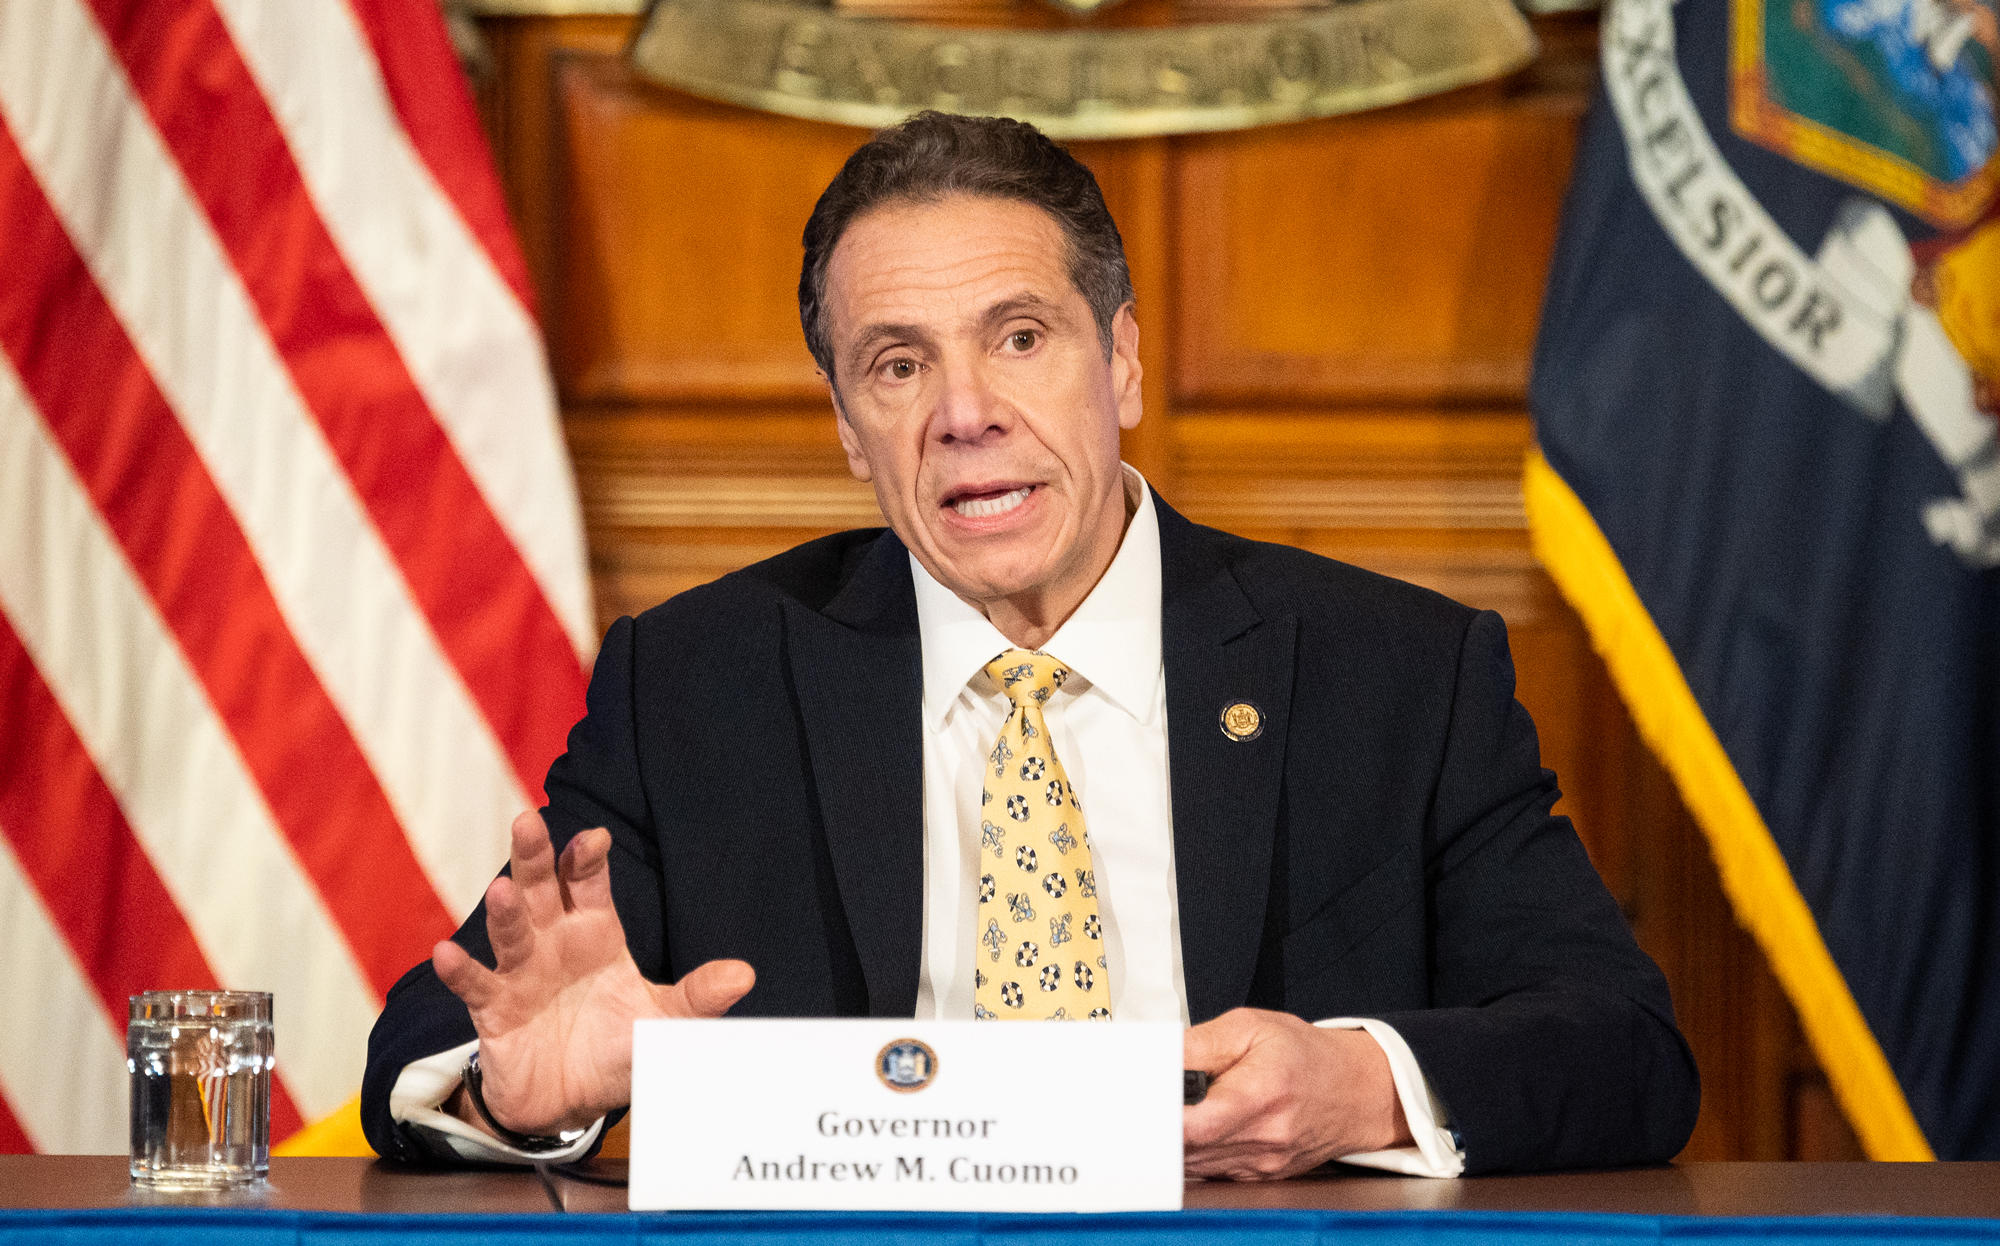 Governor Andrew Cuomo (Credit: Michael Brochstein / Echoes Wire/Barcroft Media via Getty Images)